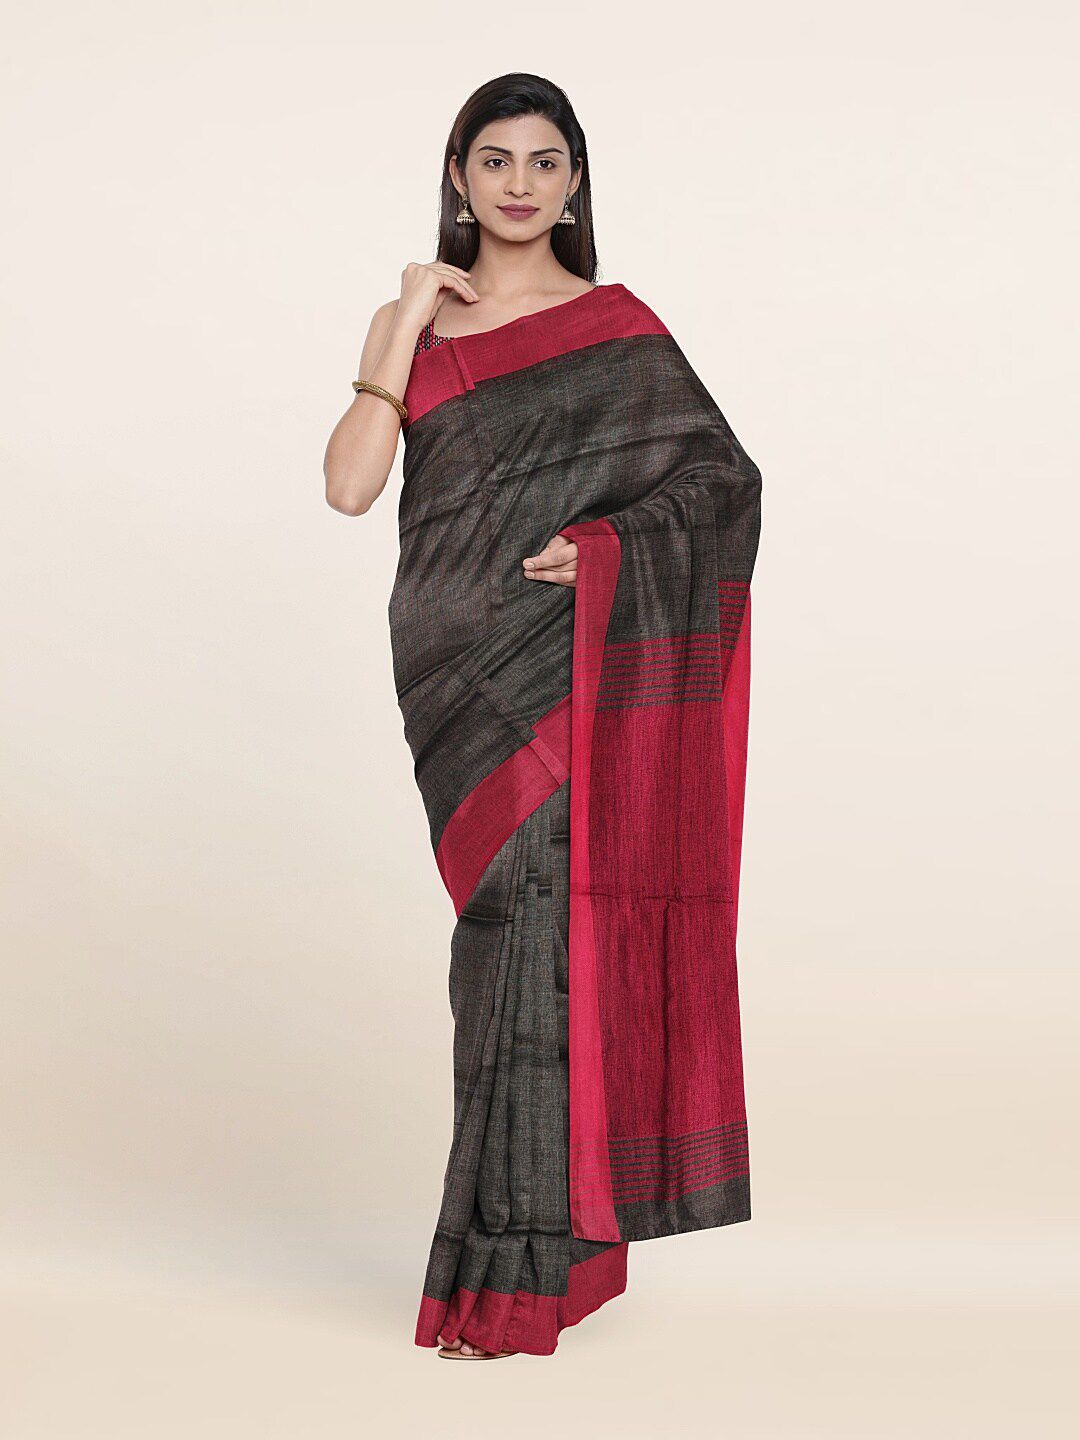 Pothys Charcoal & Pink Linen Blend Saree Price in India